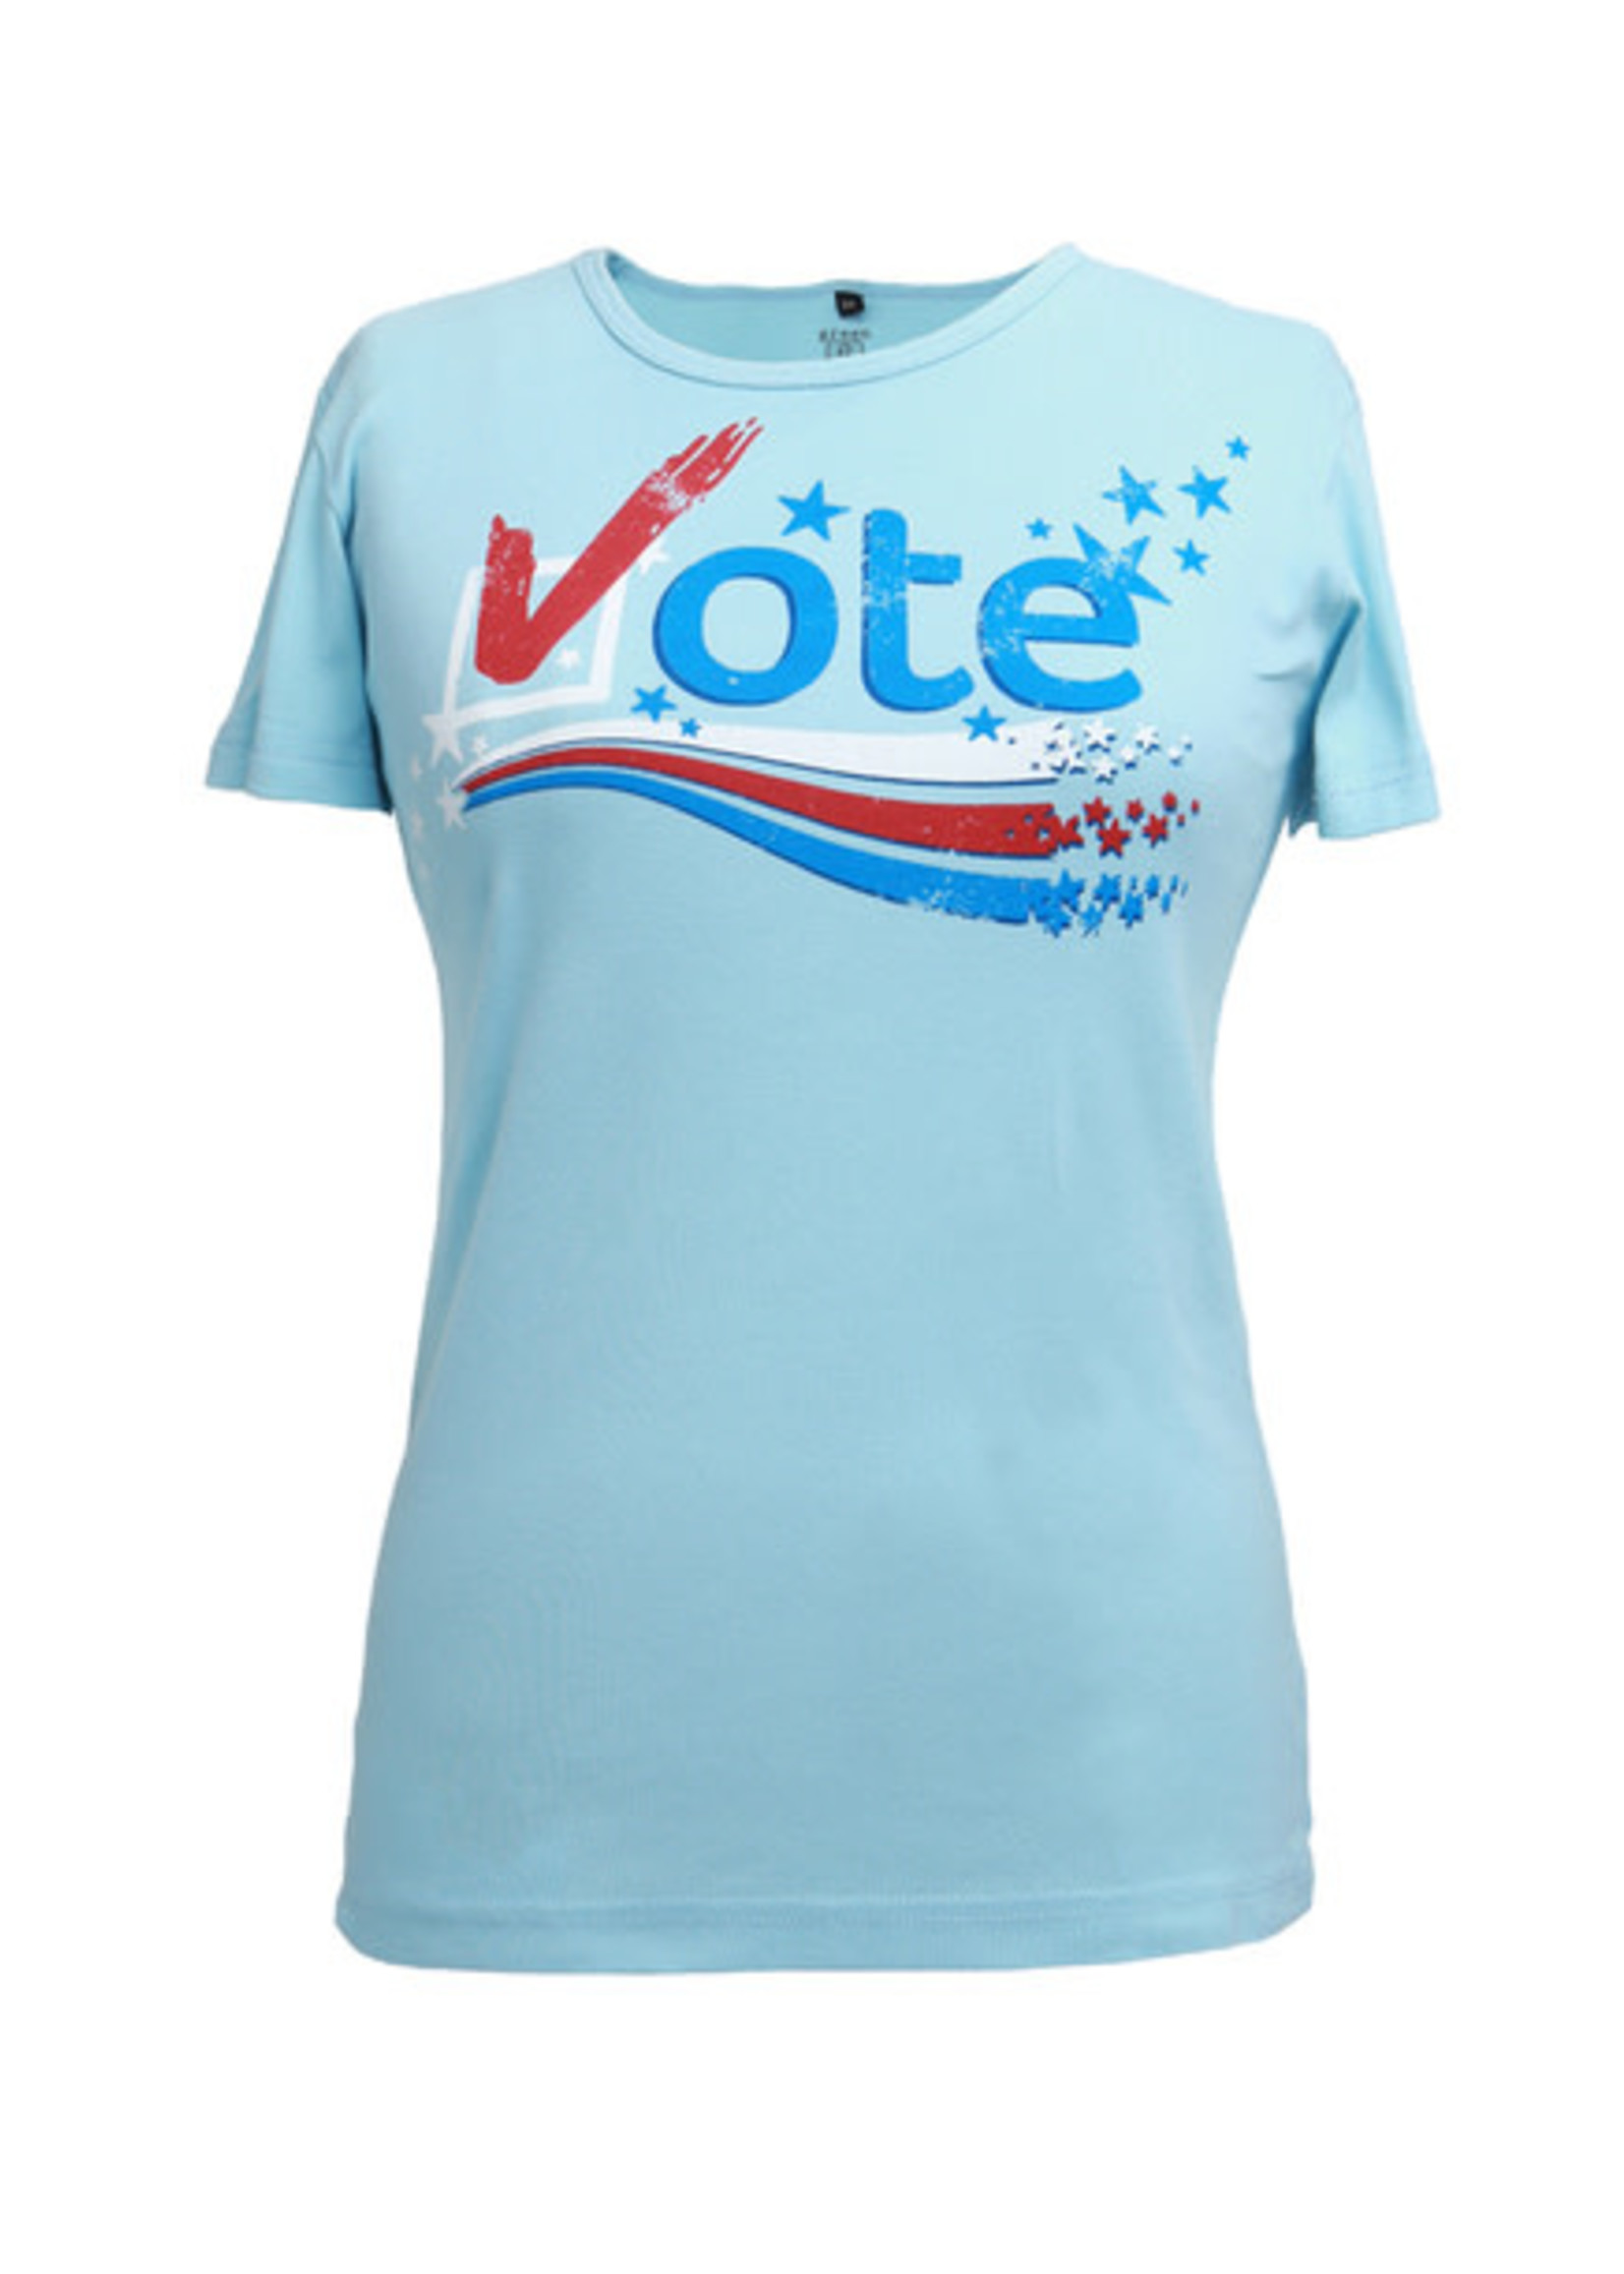 Green 3 Apparel Vote SS Tee